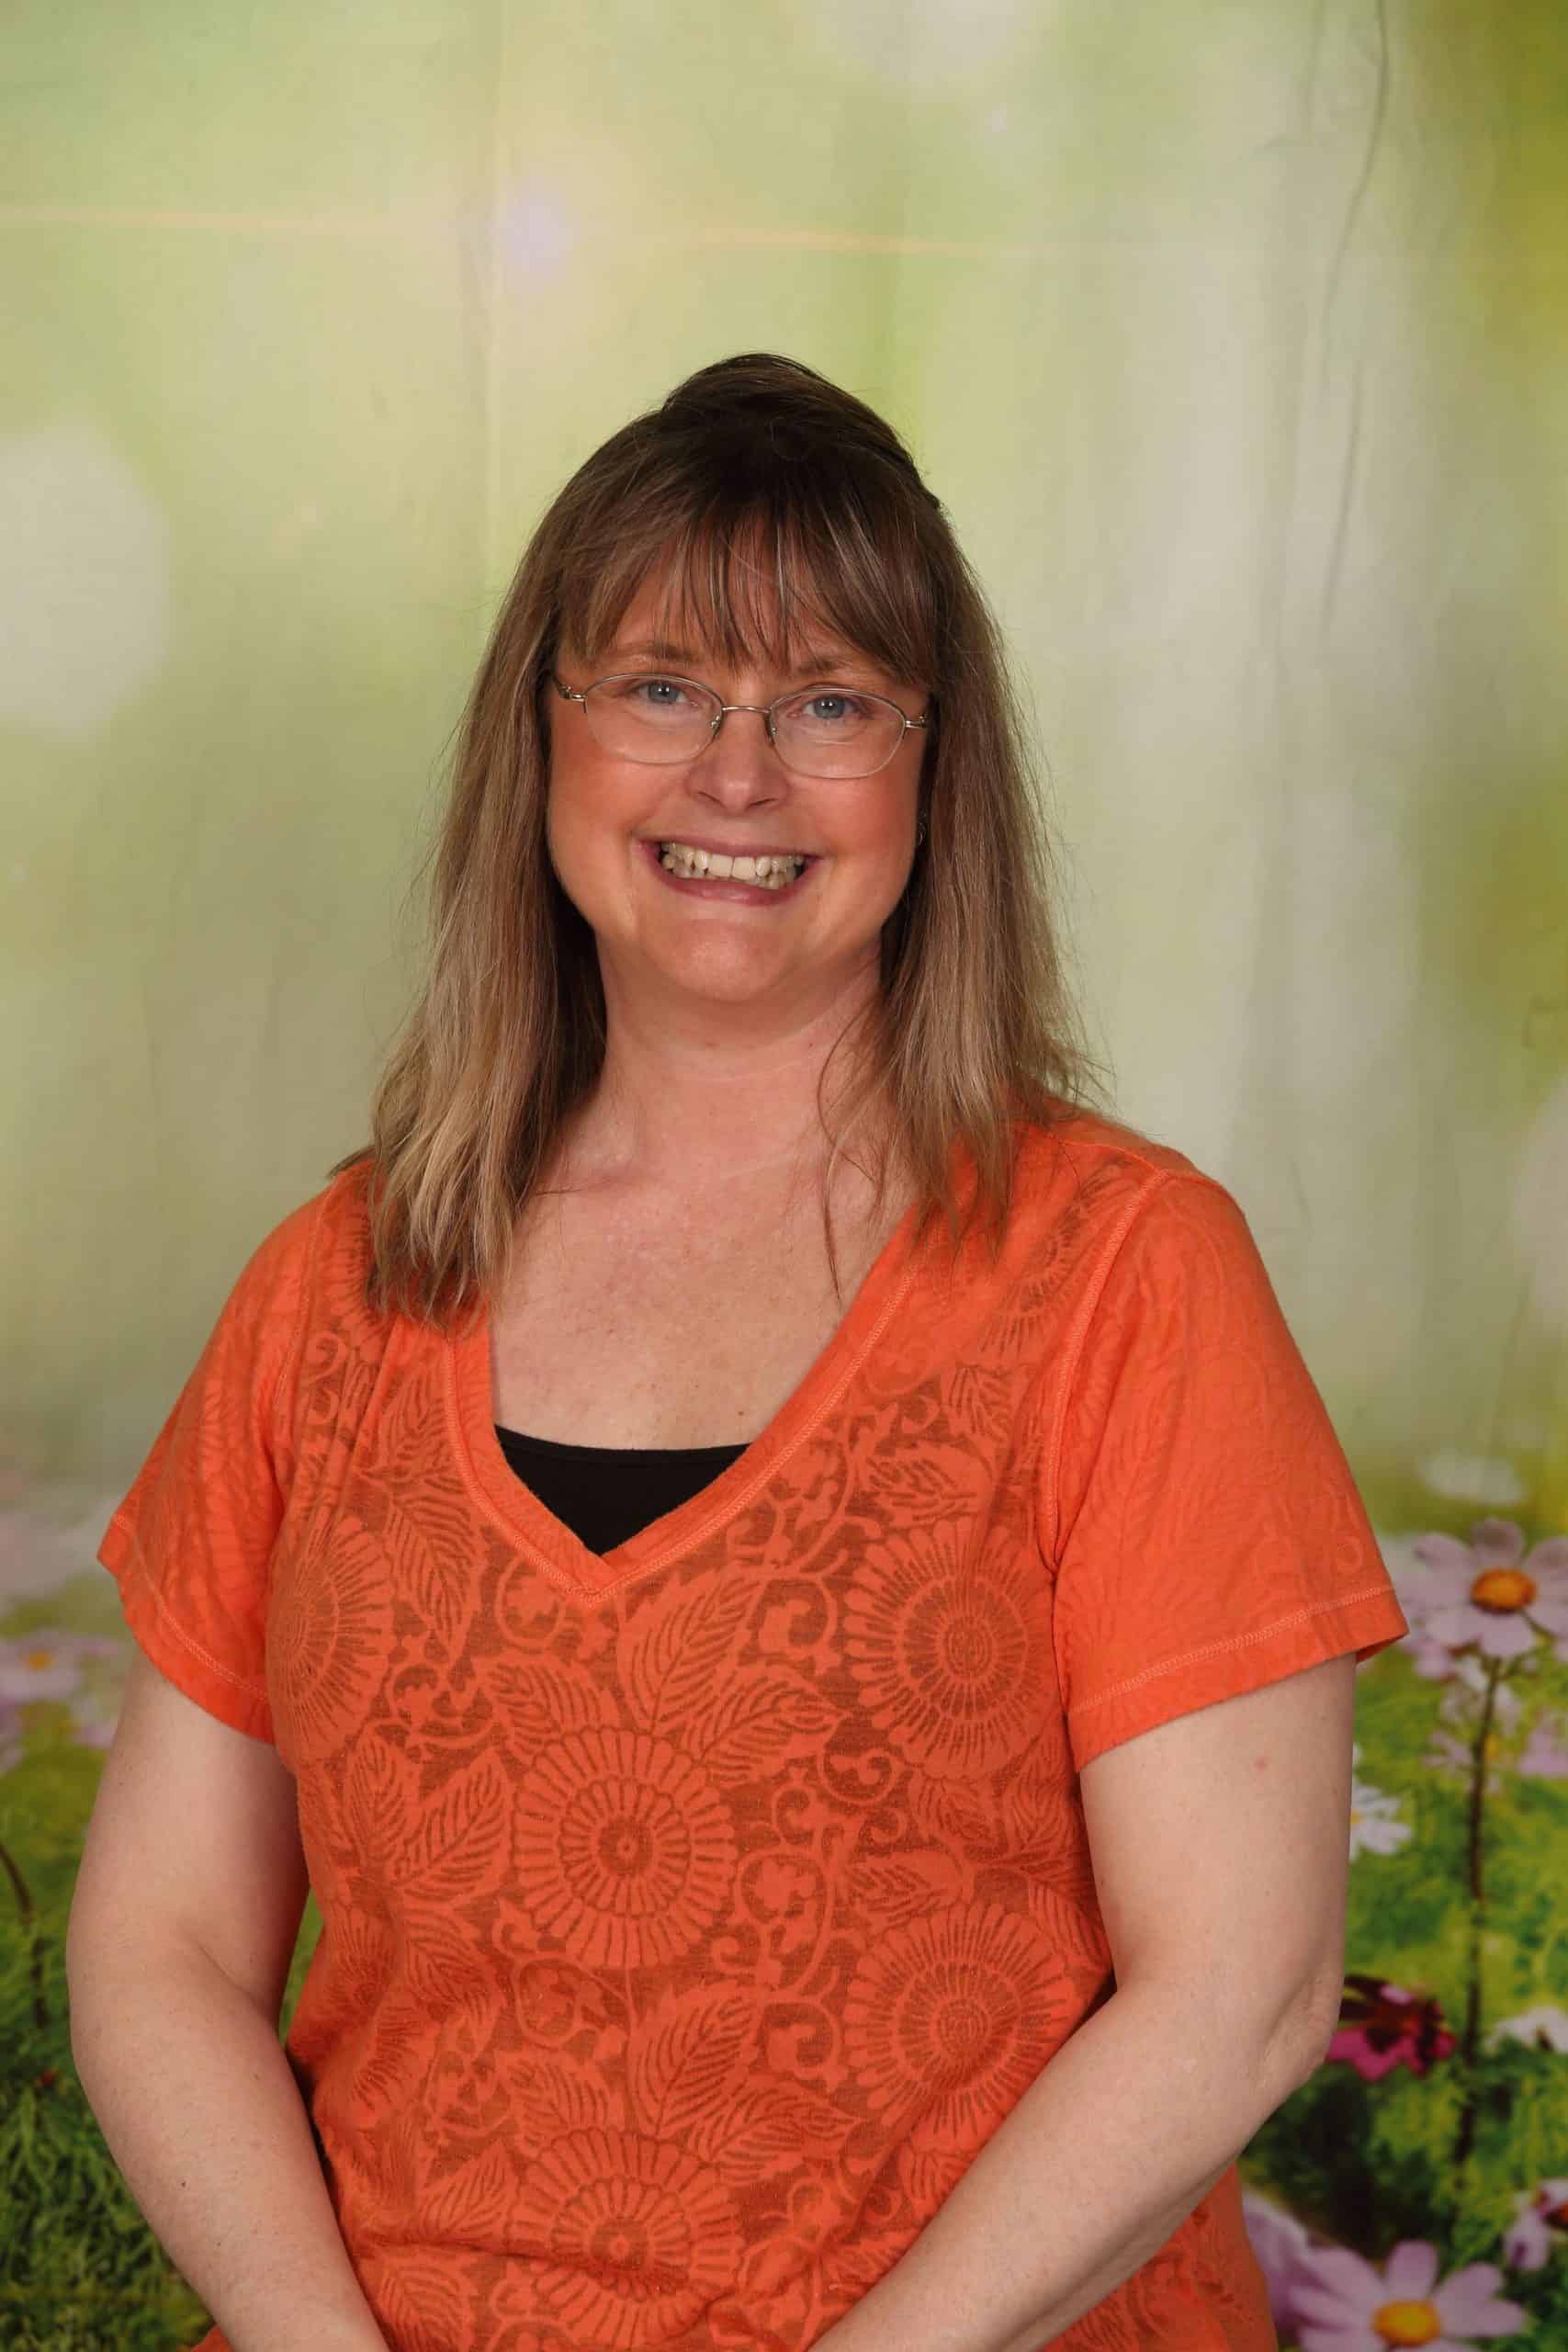 Photo of Lead Teacher Heidi Flynn. She is a Caucasian woman with long blonde hair, blue eyes and gold-rimmed glasses. She is smiling and wears a an orange shirt.